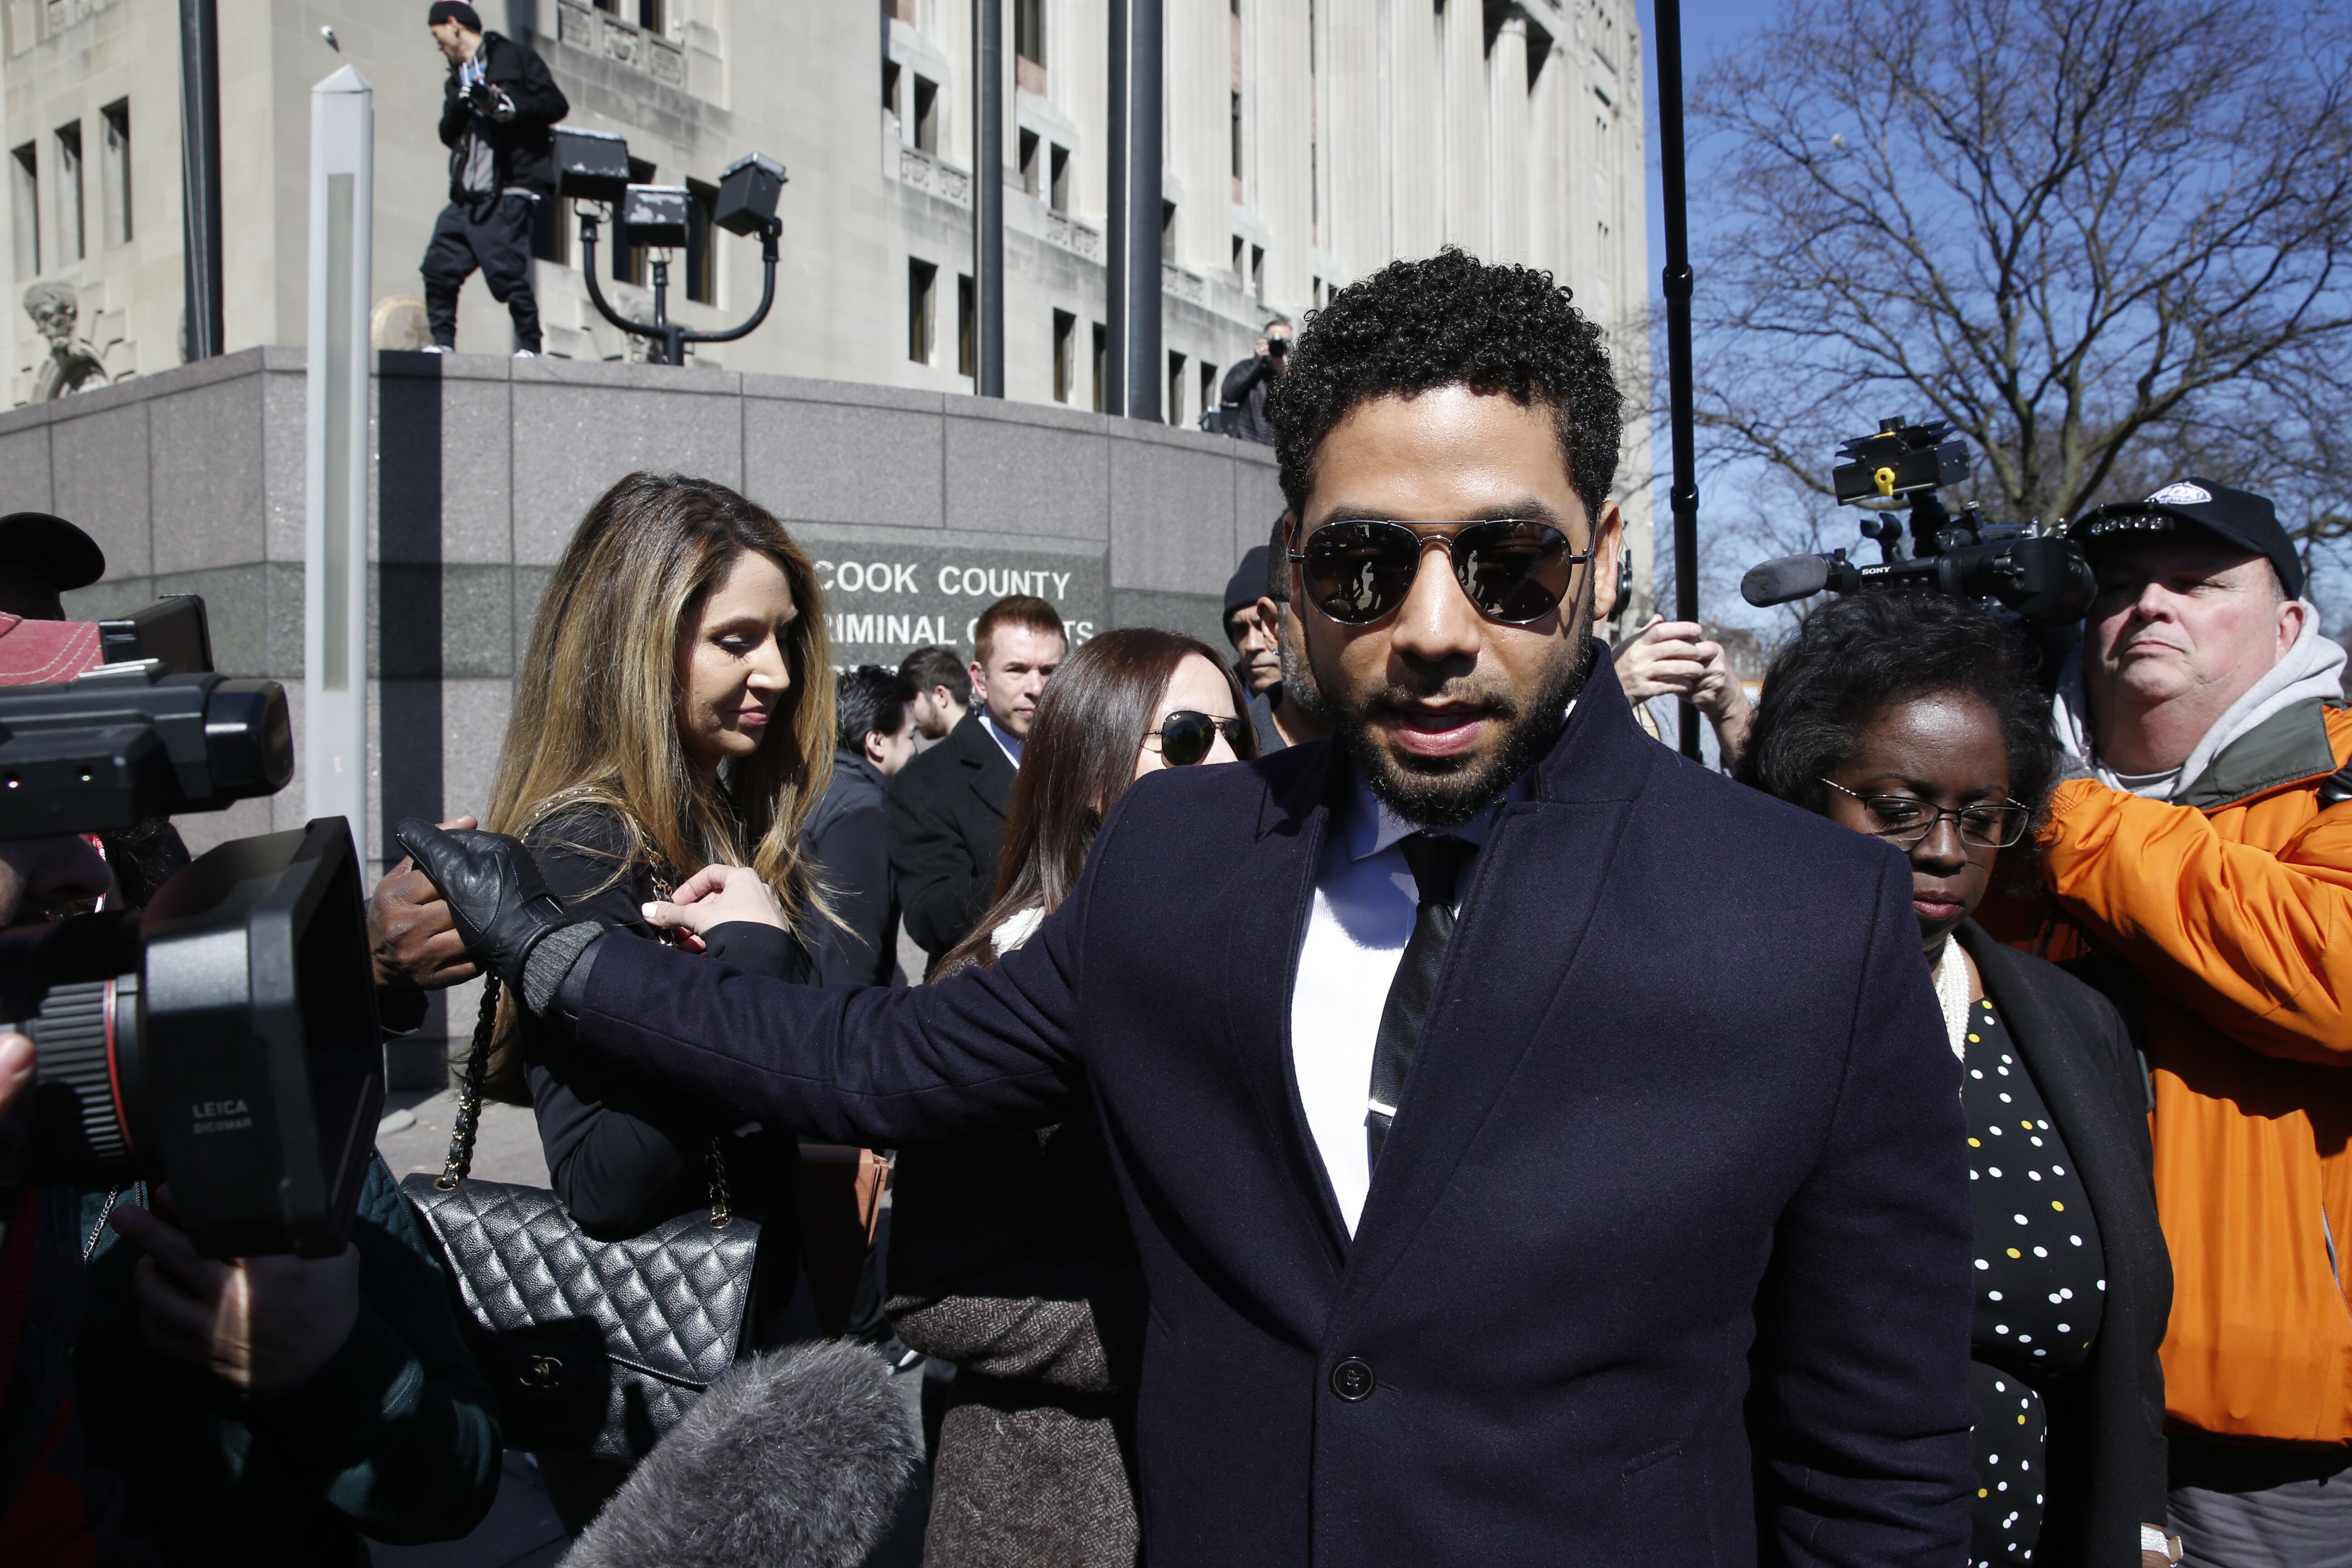 Jussie Smollett outside the Cook County Court | Source: Getty Images/GlobalImagesUkraine